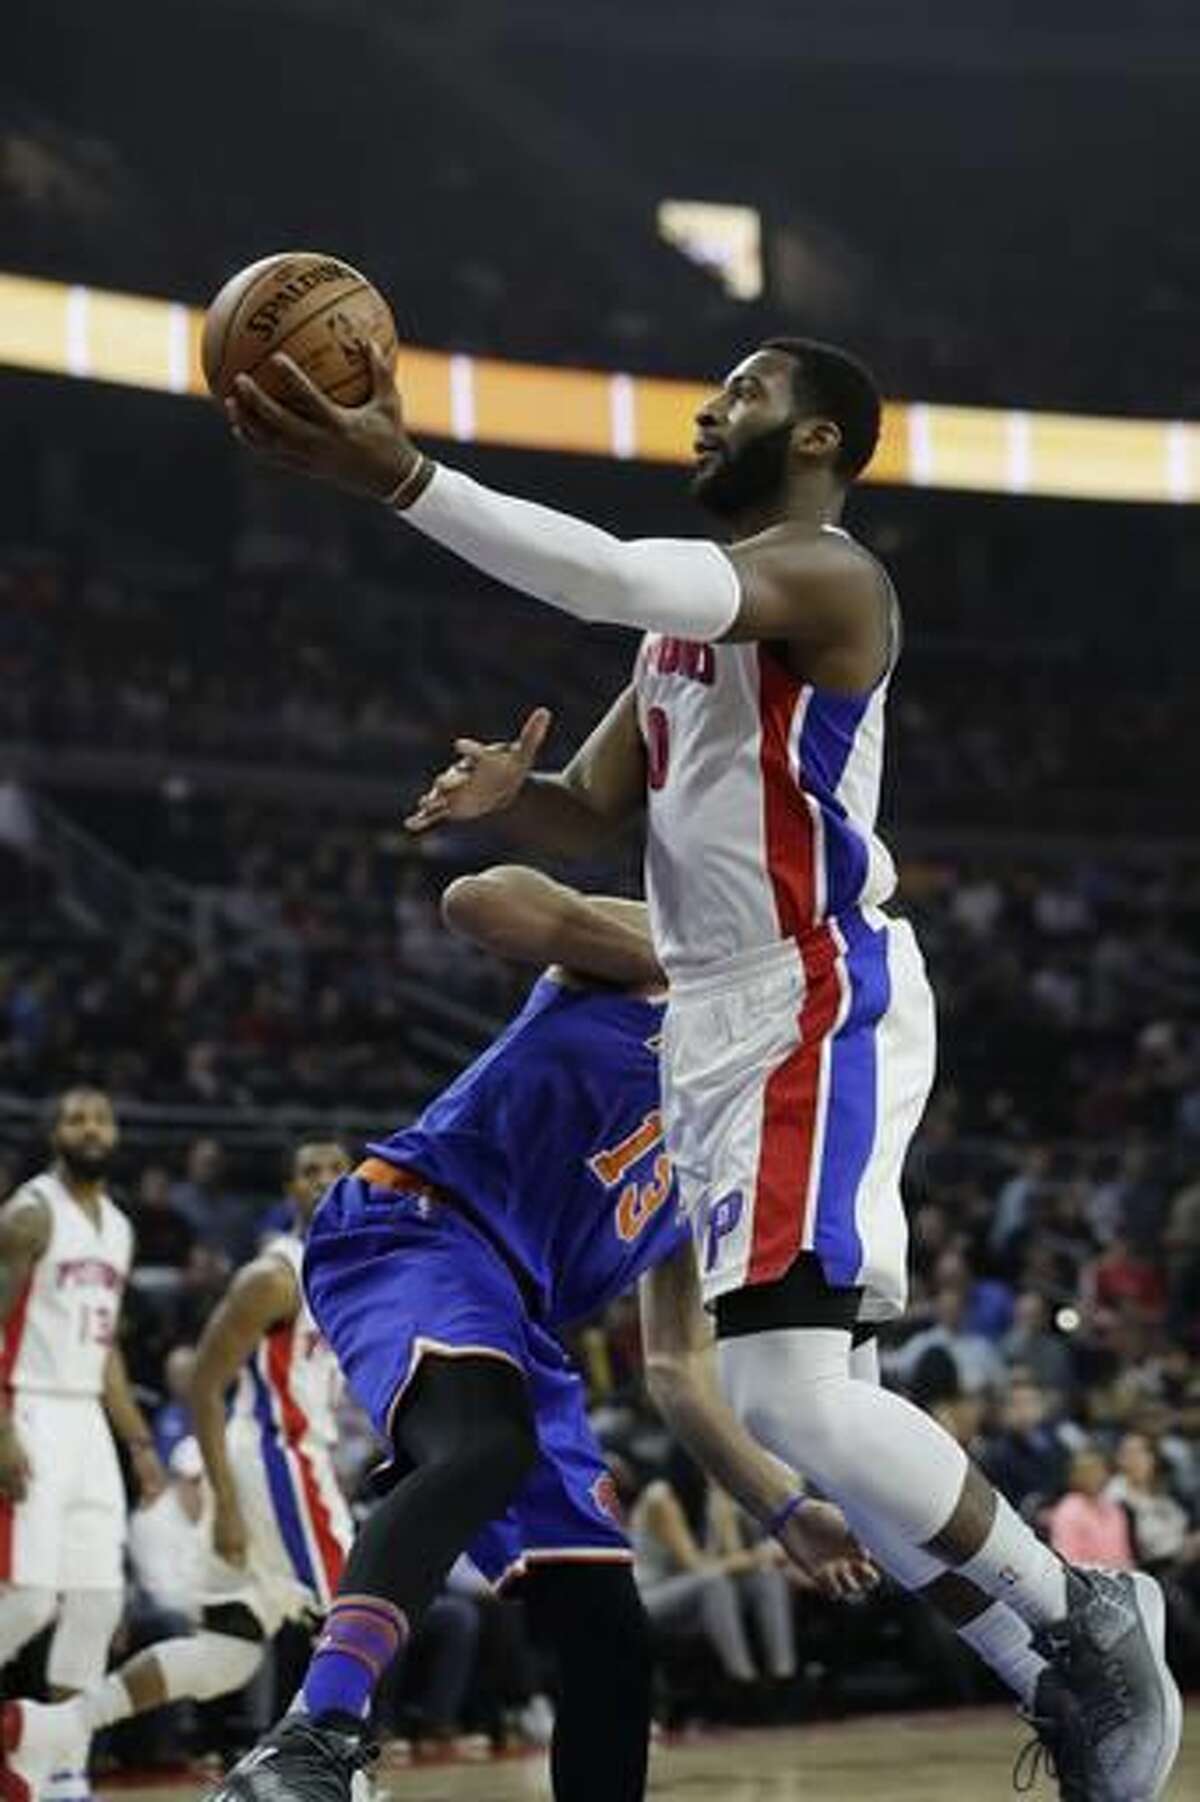 Detroit Pistons center Andre Drummond (0) makes a layup as New York Knicks center Joakim Noah defends during the first half of an NBA basketball game, Tuesday, Nov. 1, 2016, in Auburn Hills, Mich. (AP Photo/Carlos Osorio)